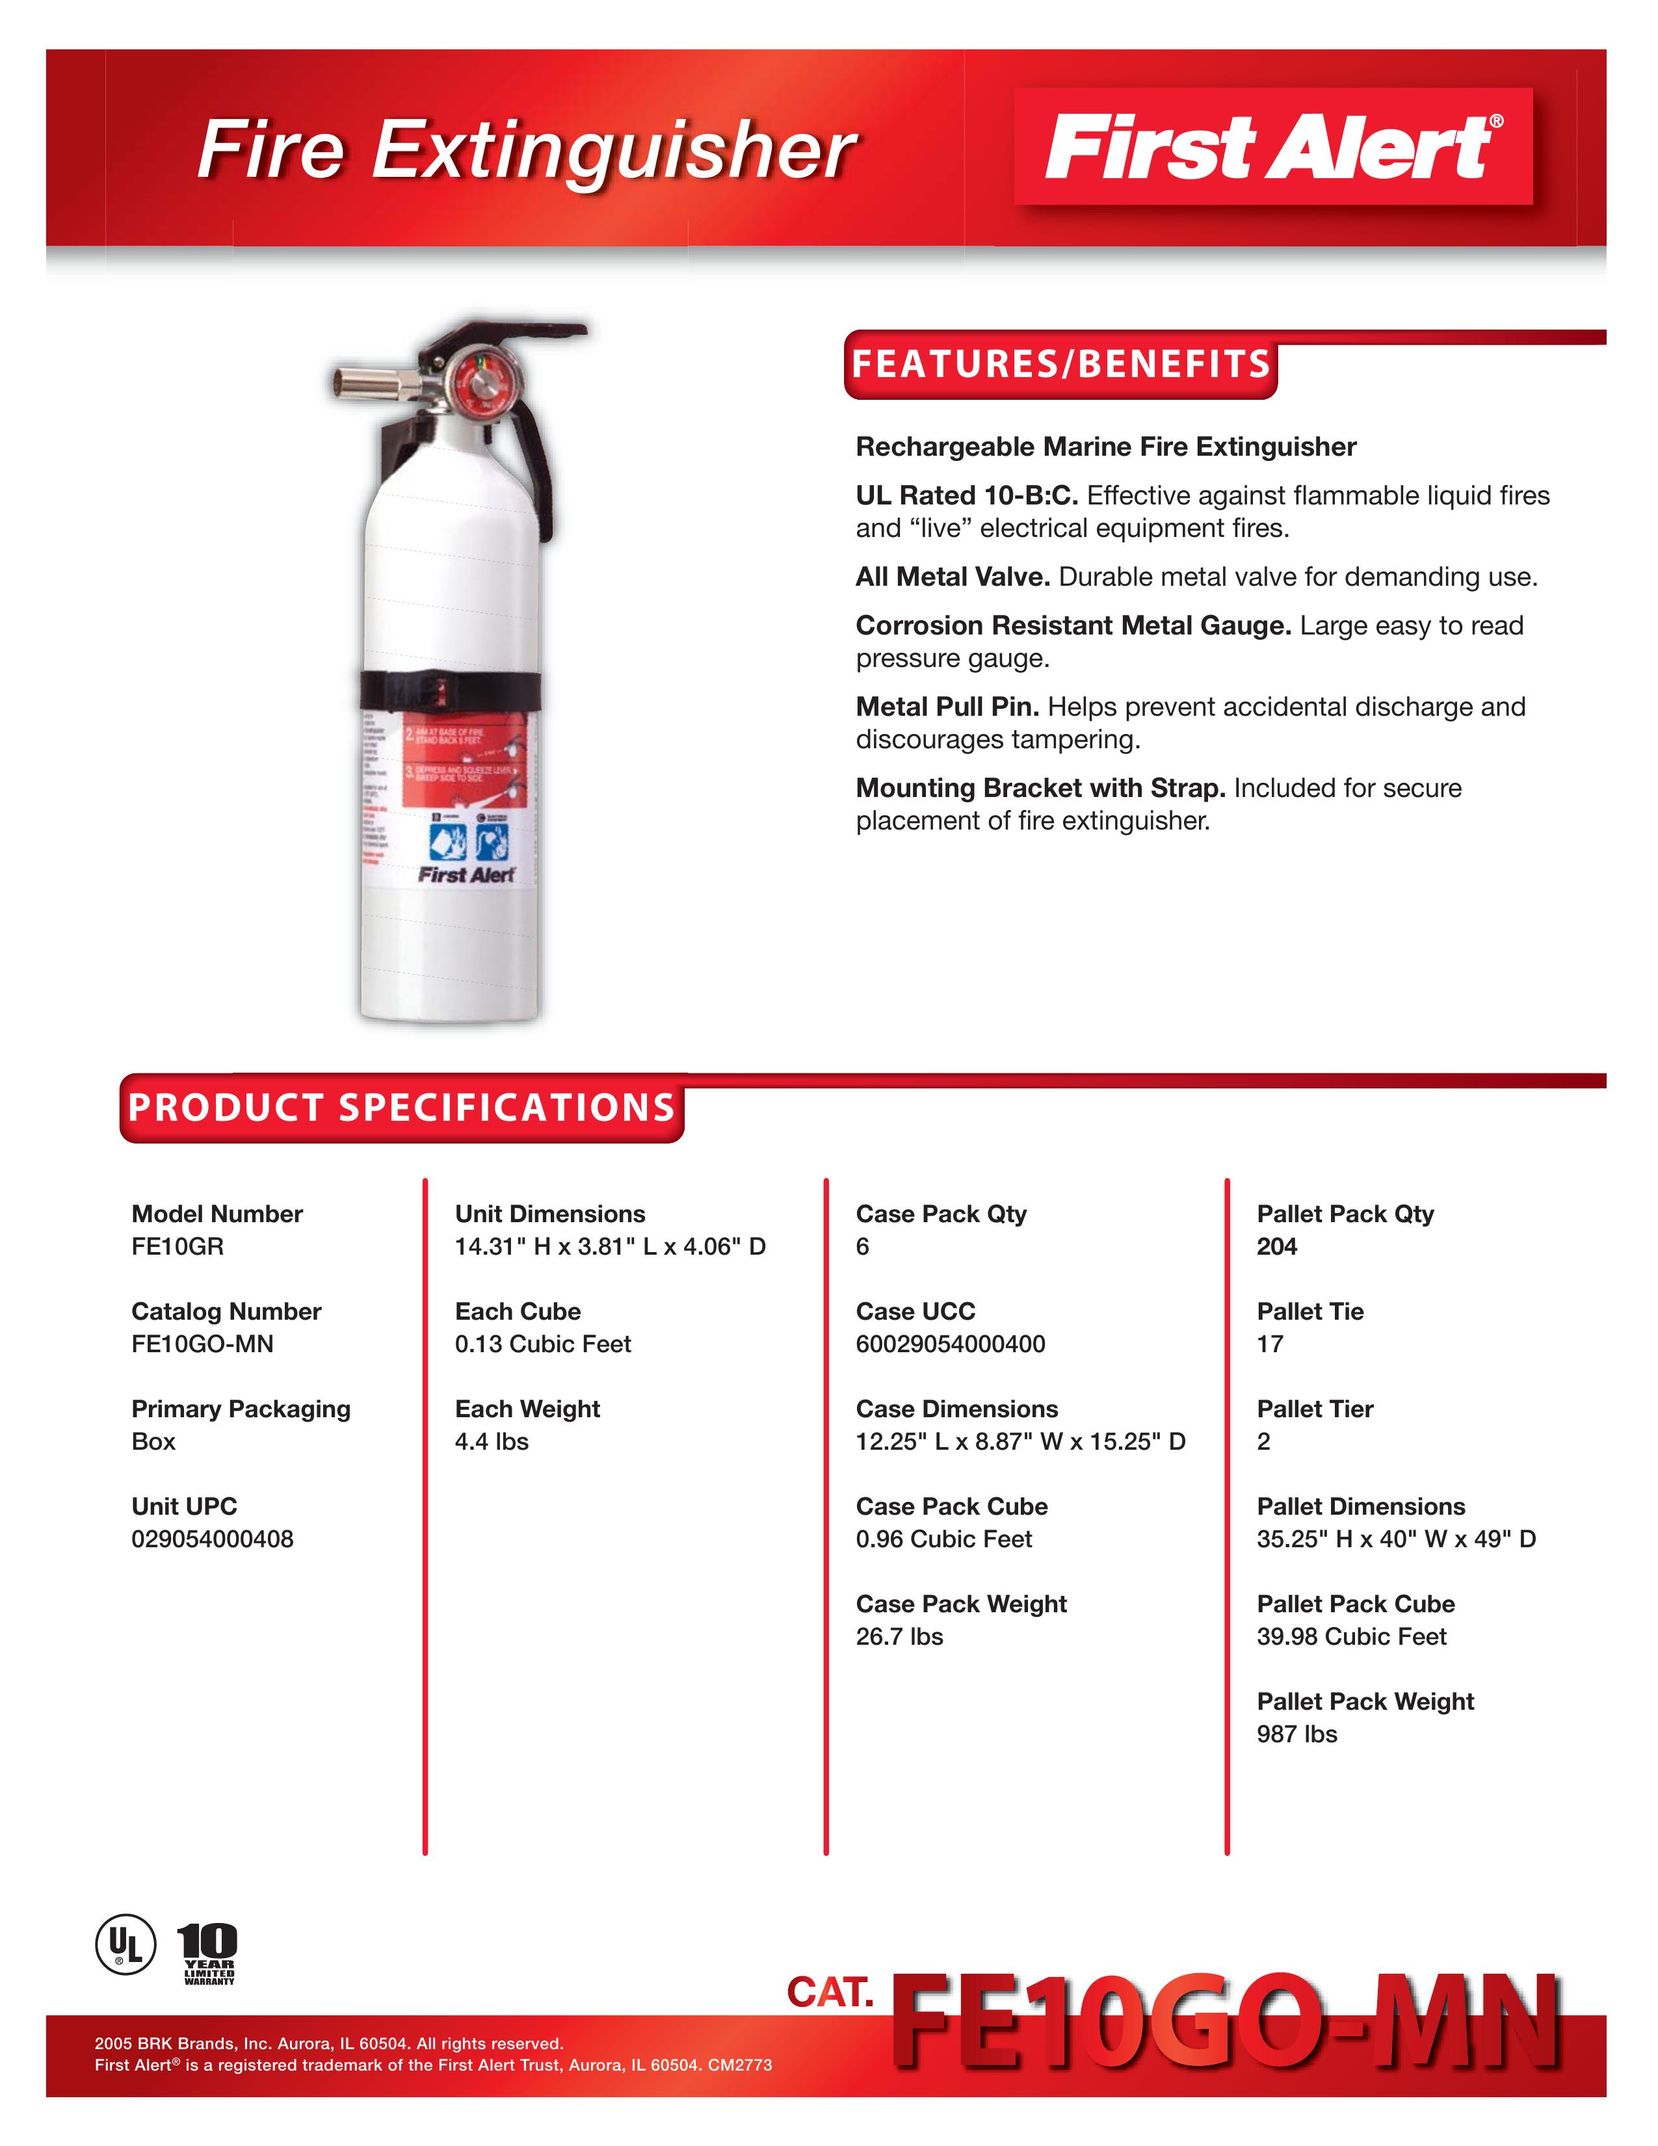 BRK electronic FE10GO-MN Fire Extinguisher User Manual